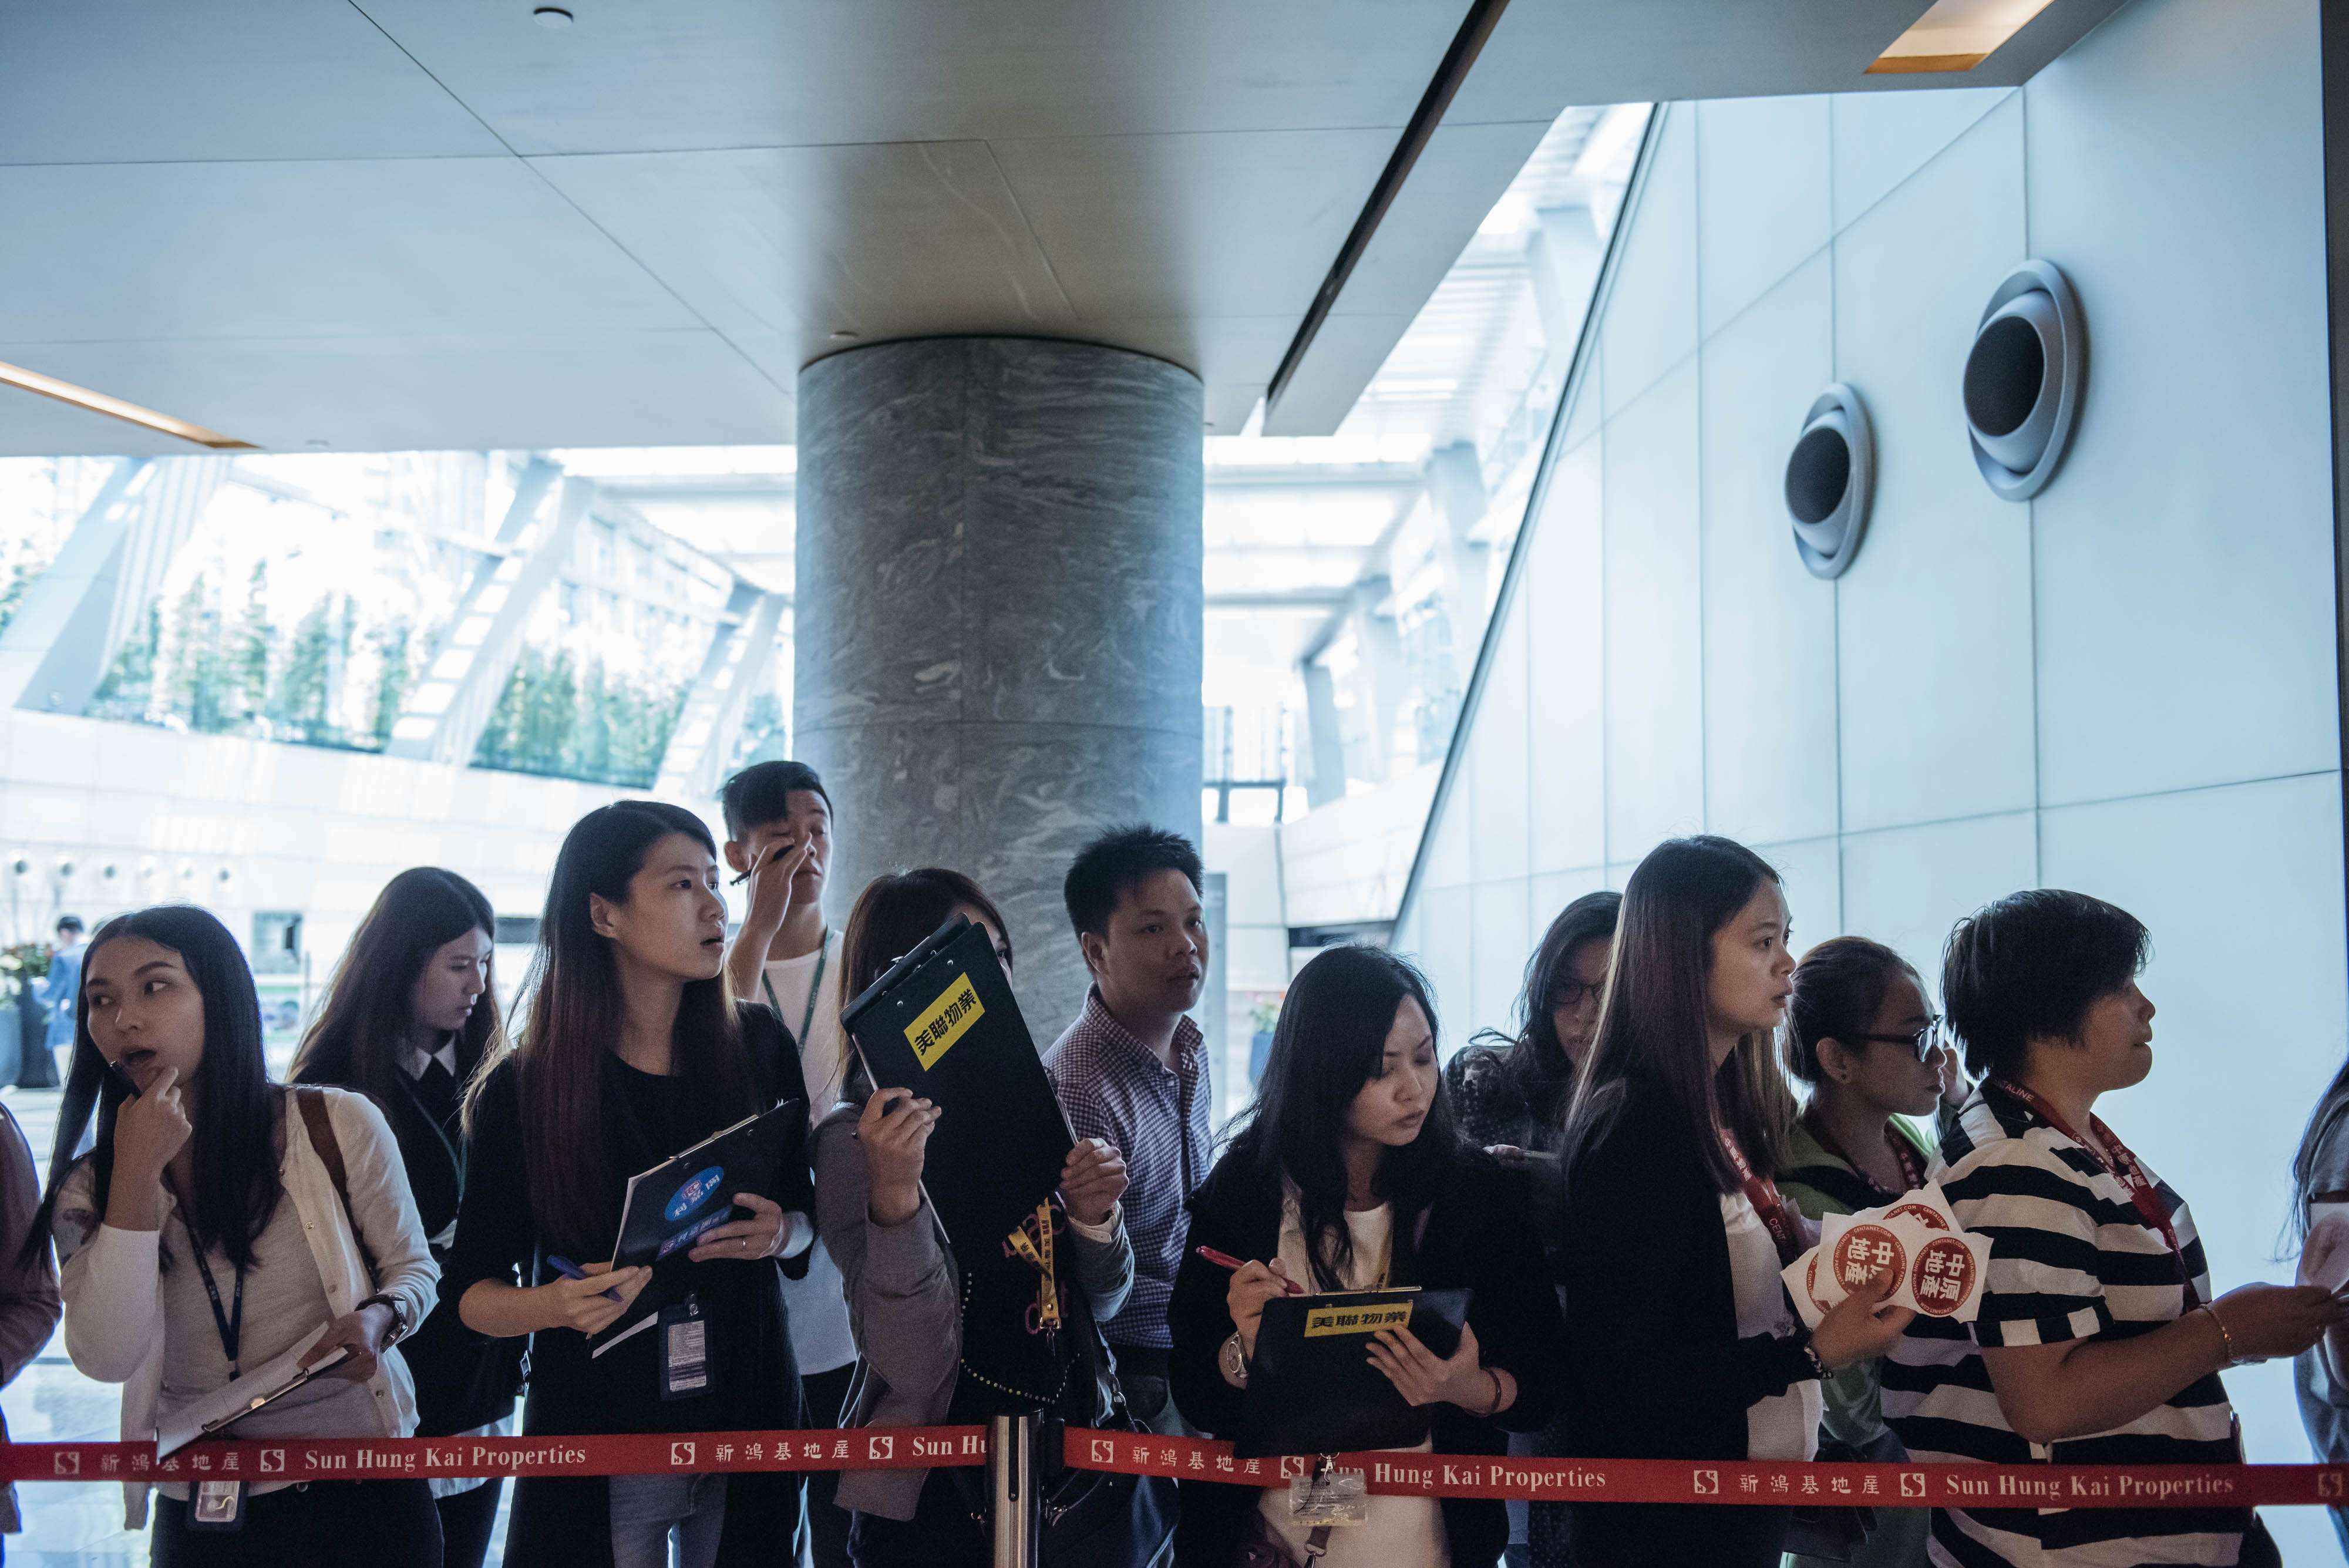 Real estate agents waiting last weekend for potential buyers outside the sales office of Park Yoho Venezia, a residential property developed by Sun Hung Kai Properties Ltd in Hong Kong. Anthony Kwan, Bloomberg